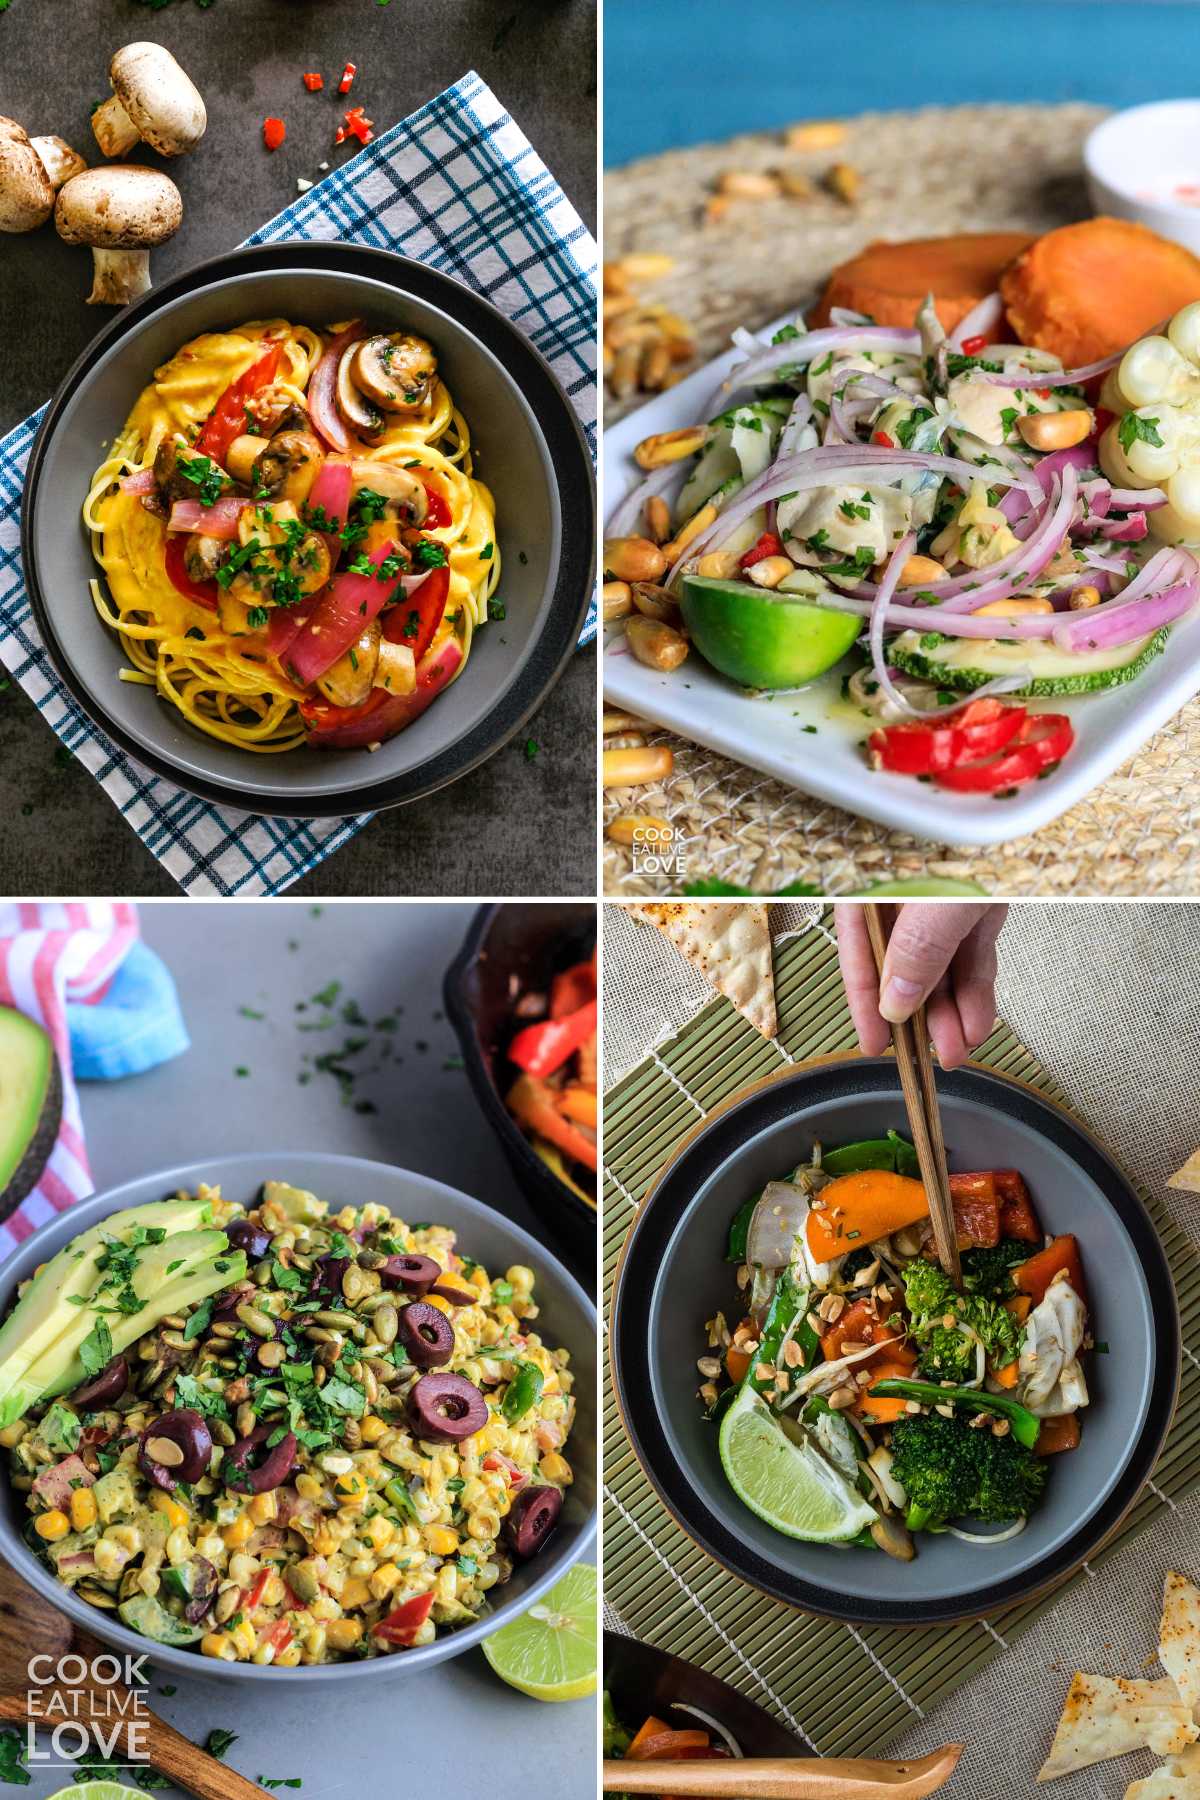 A collage of spicy vegetarian dishes including a pasta, ceviche, corn salad, and spicy stir fry.